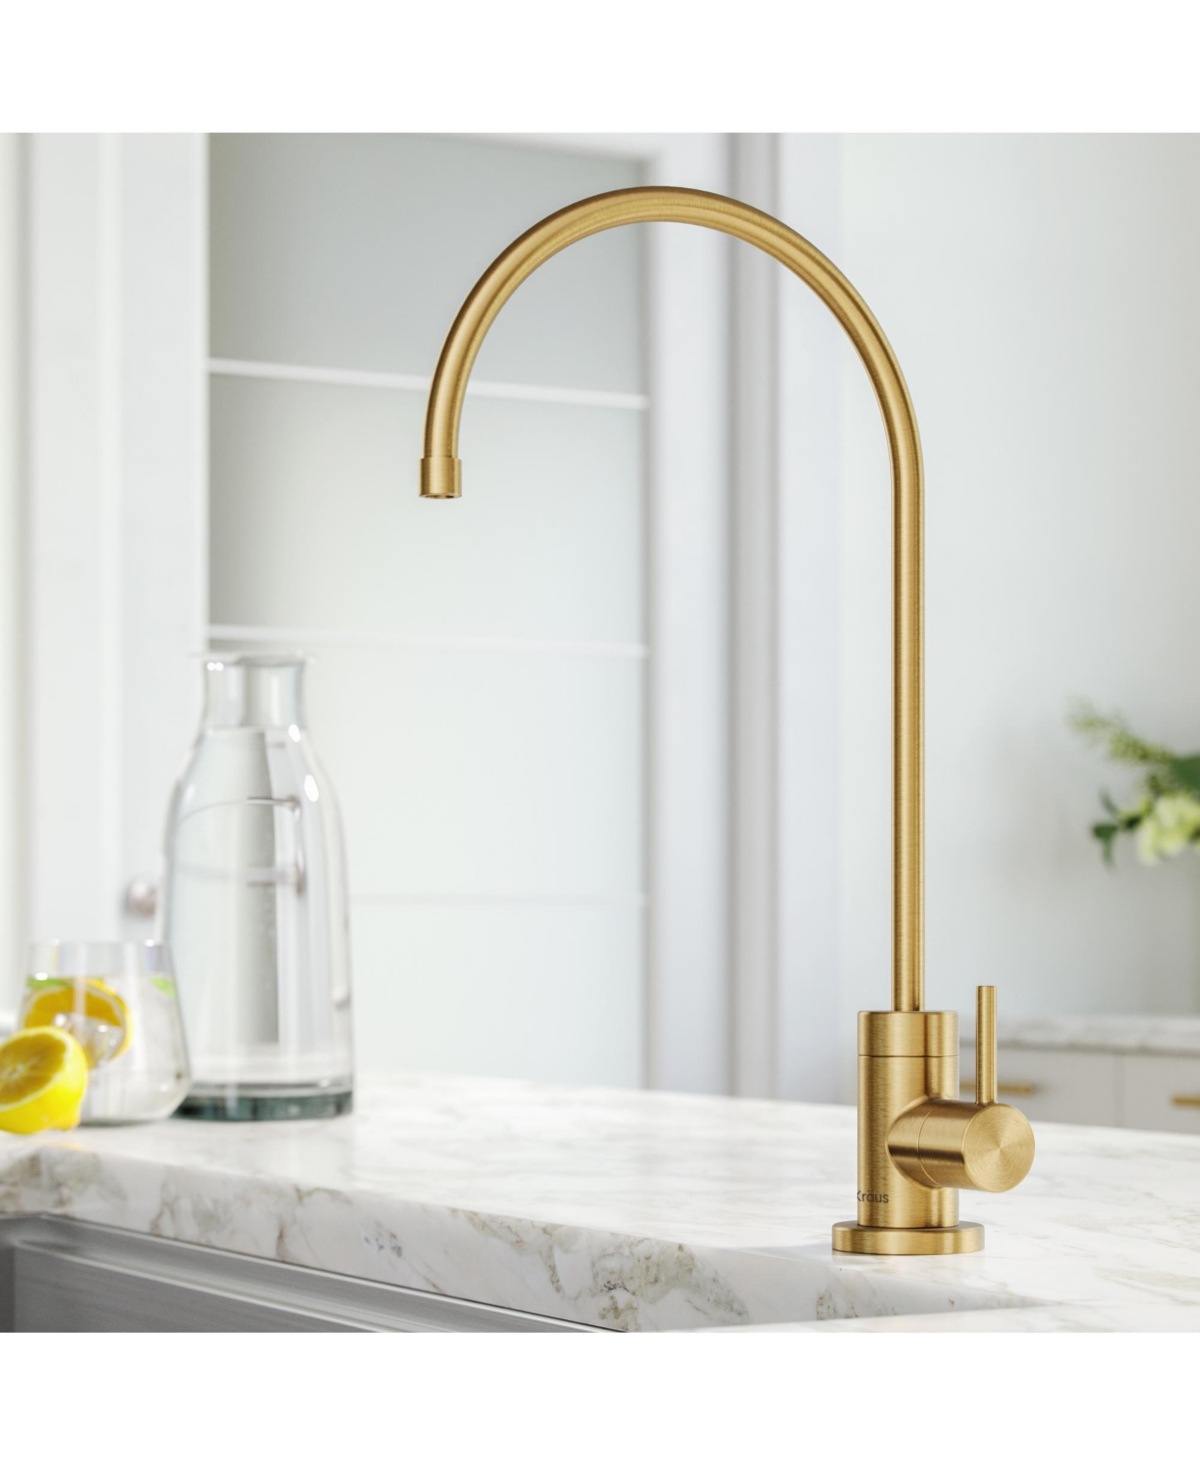 Purita 100% Lead-Free Kitchen Water Filter Faucet - Spot free antique champagne bronze